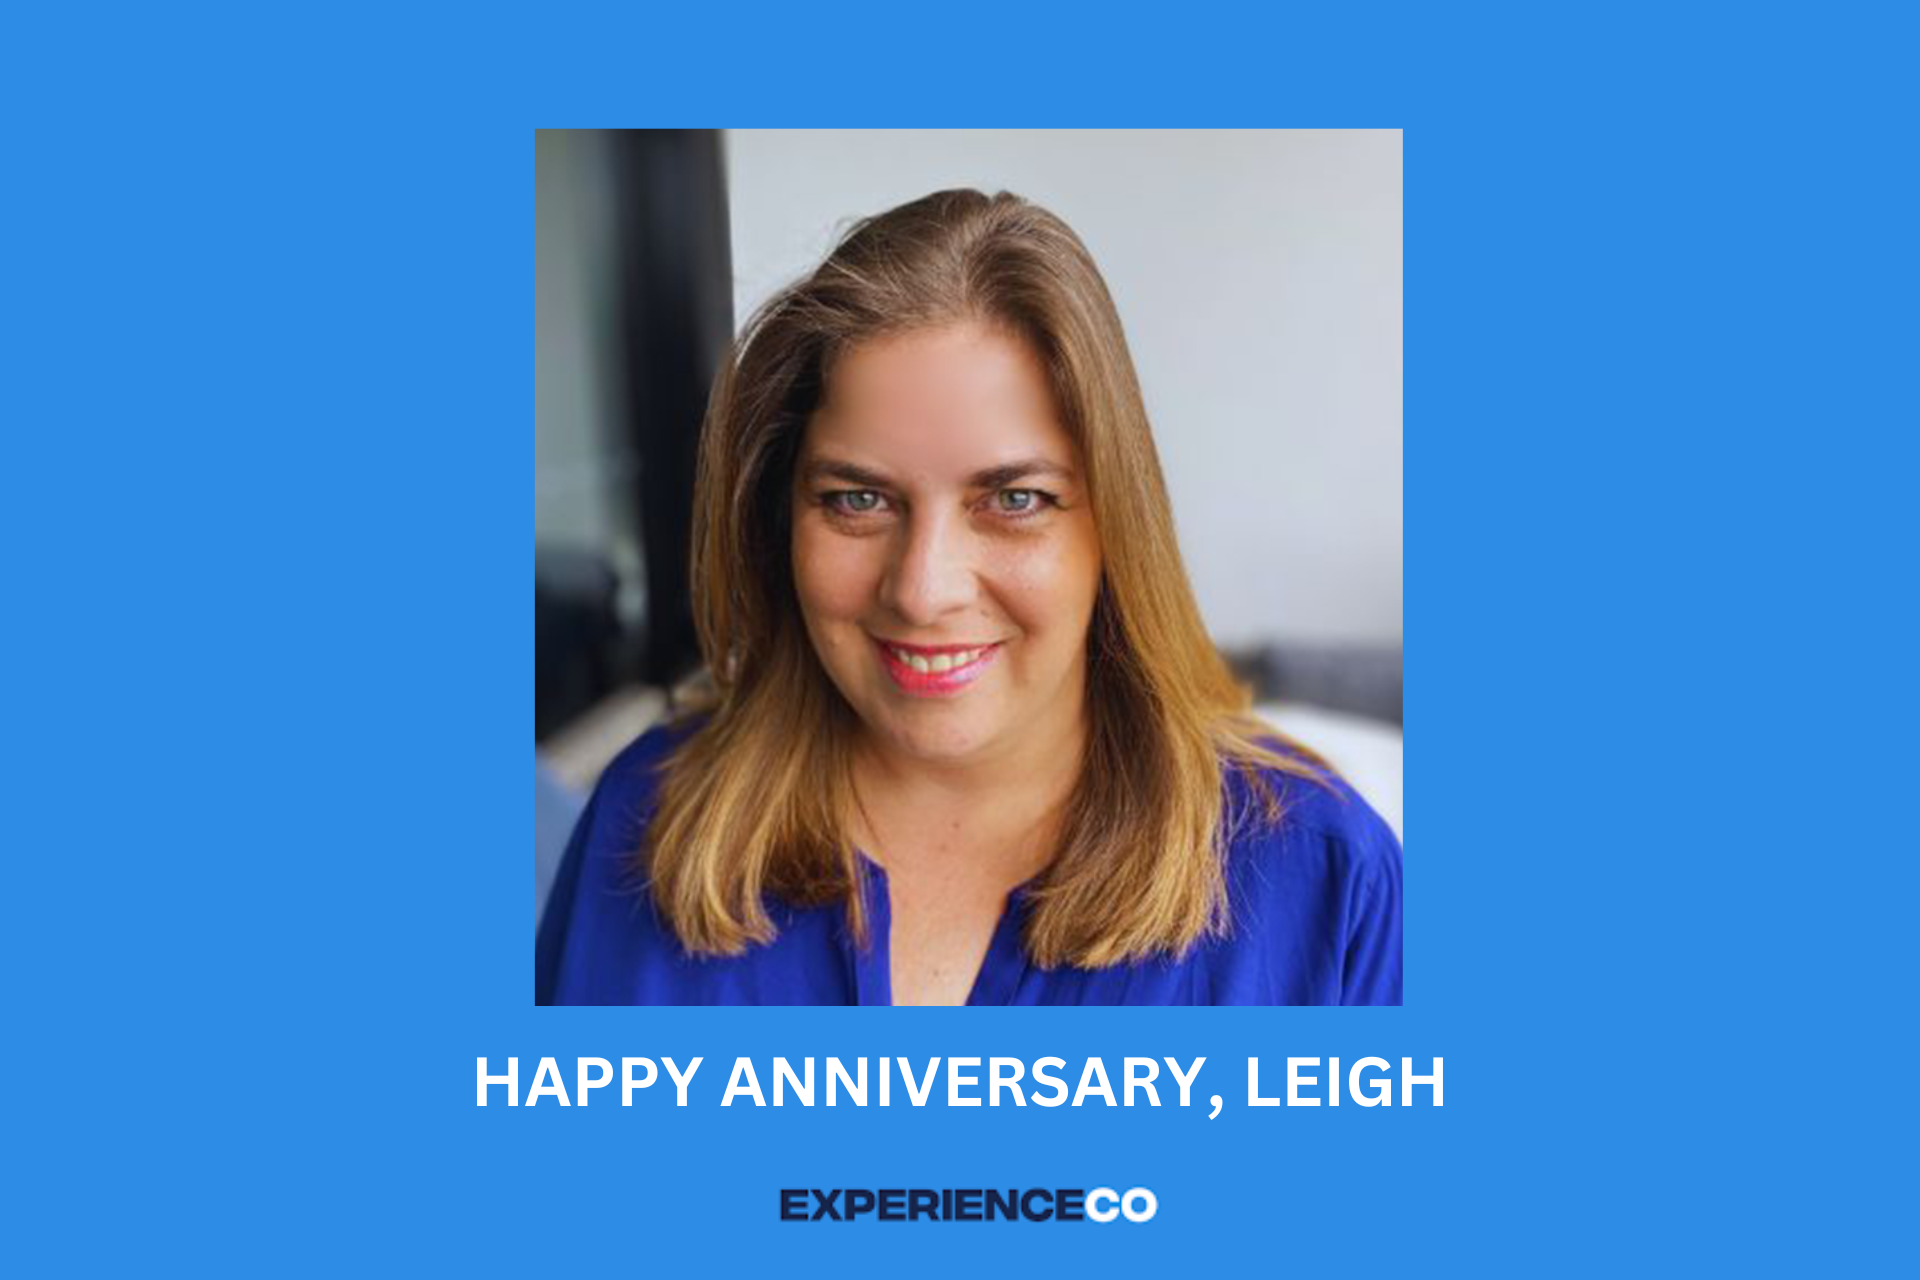 Leigh Stirling celebrates 4 years with with EXP